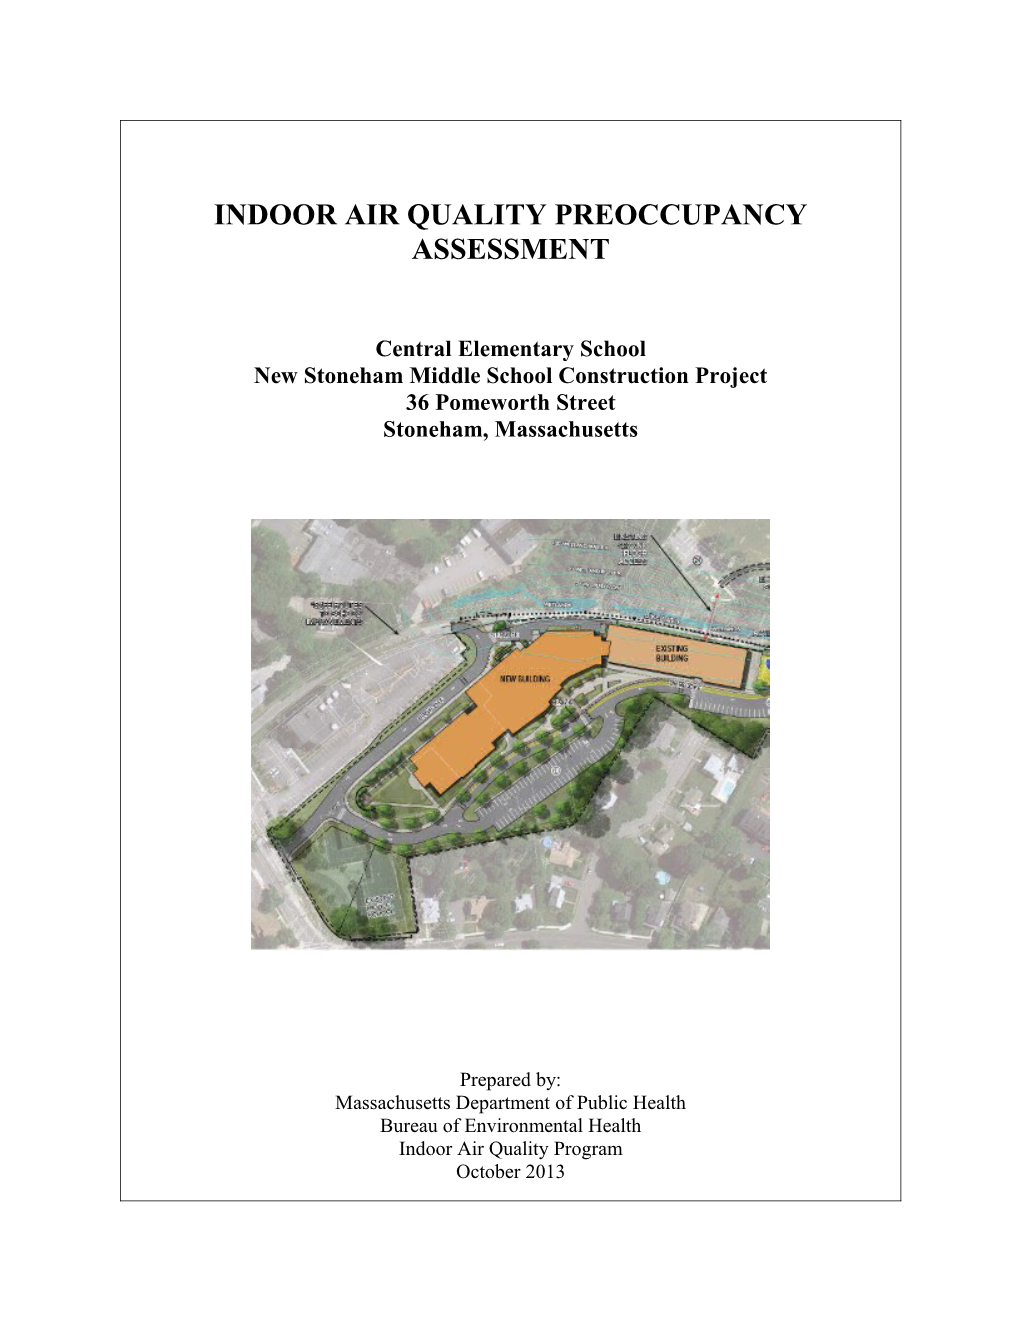 Indoor Air Quality Assessment (Pre-Occupancy)